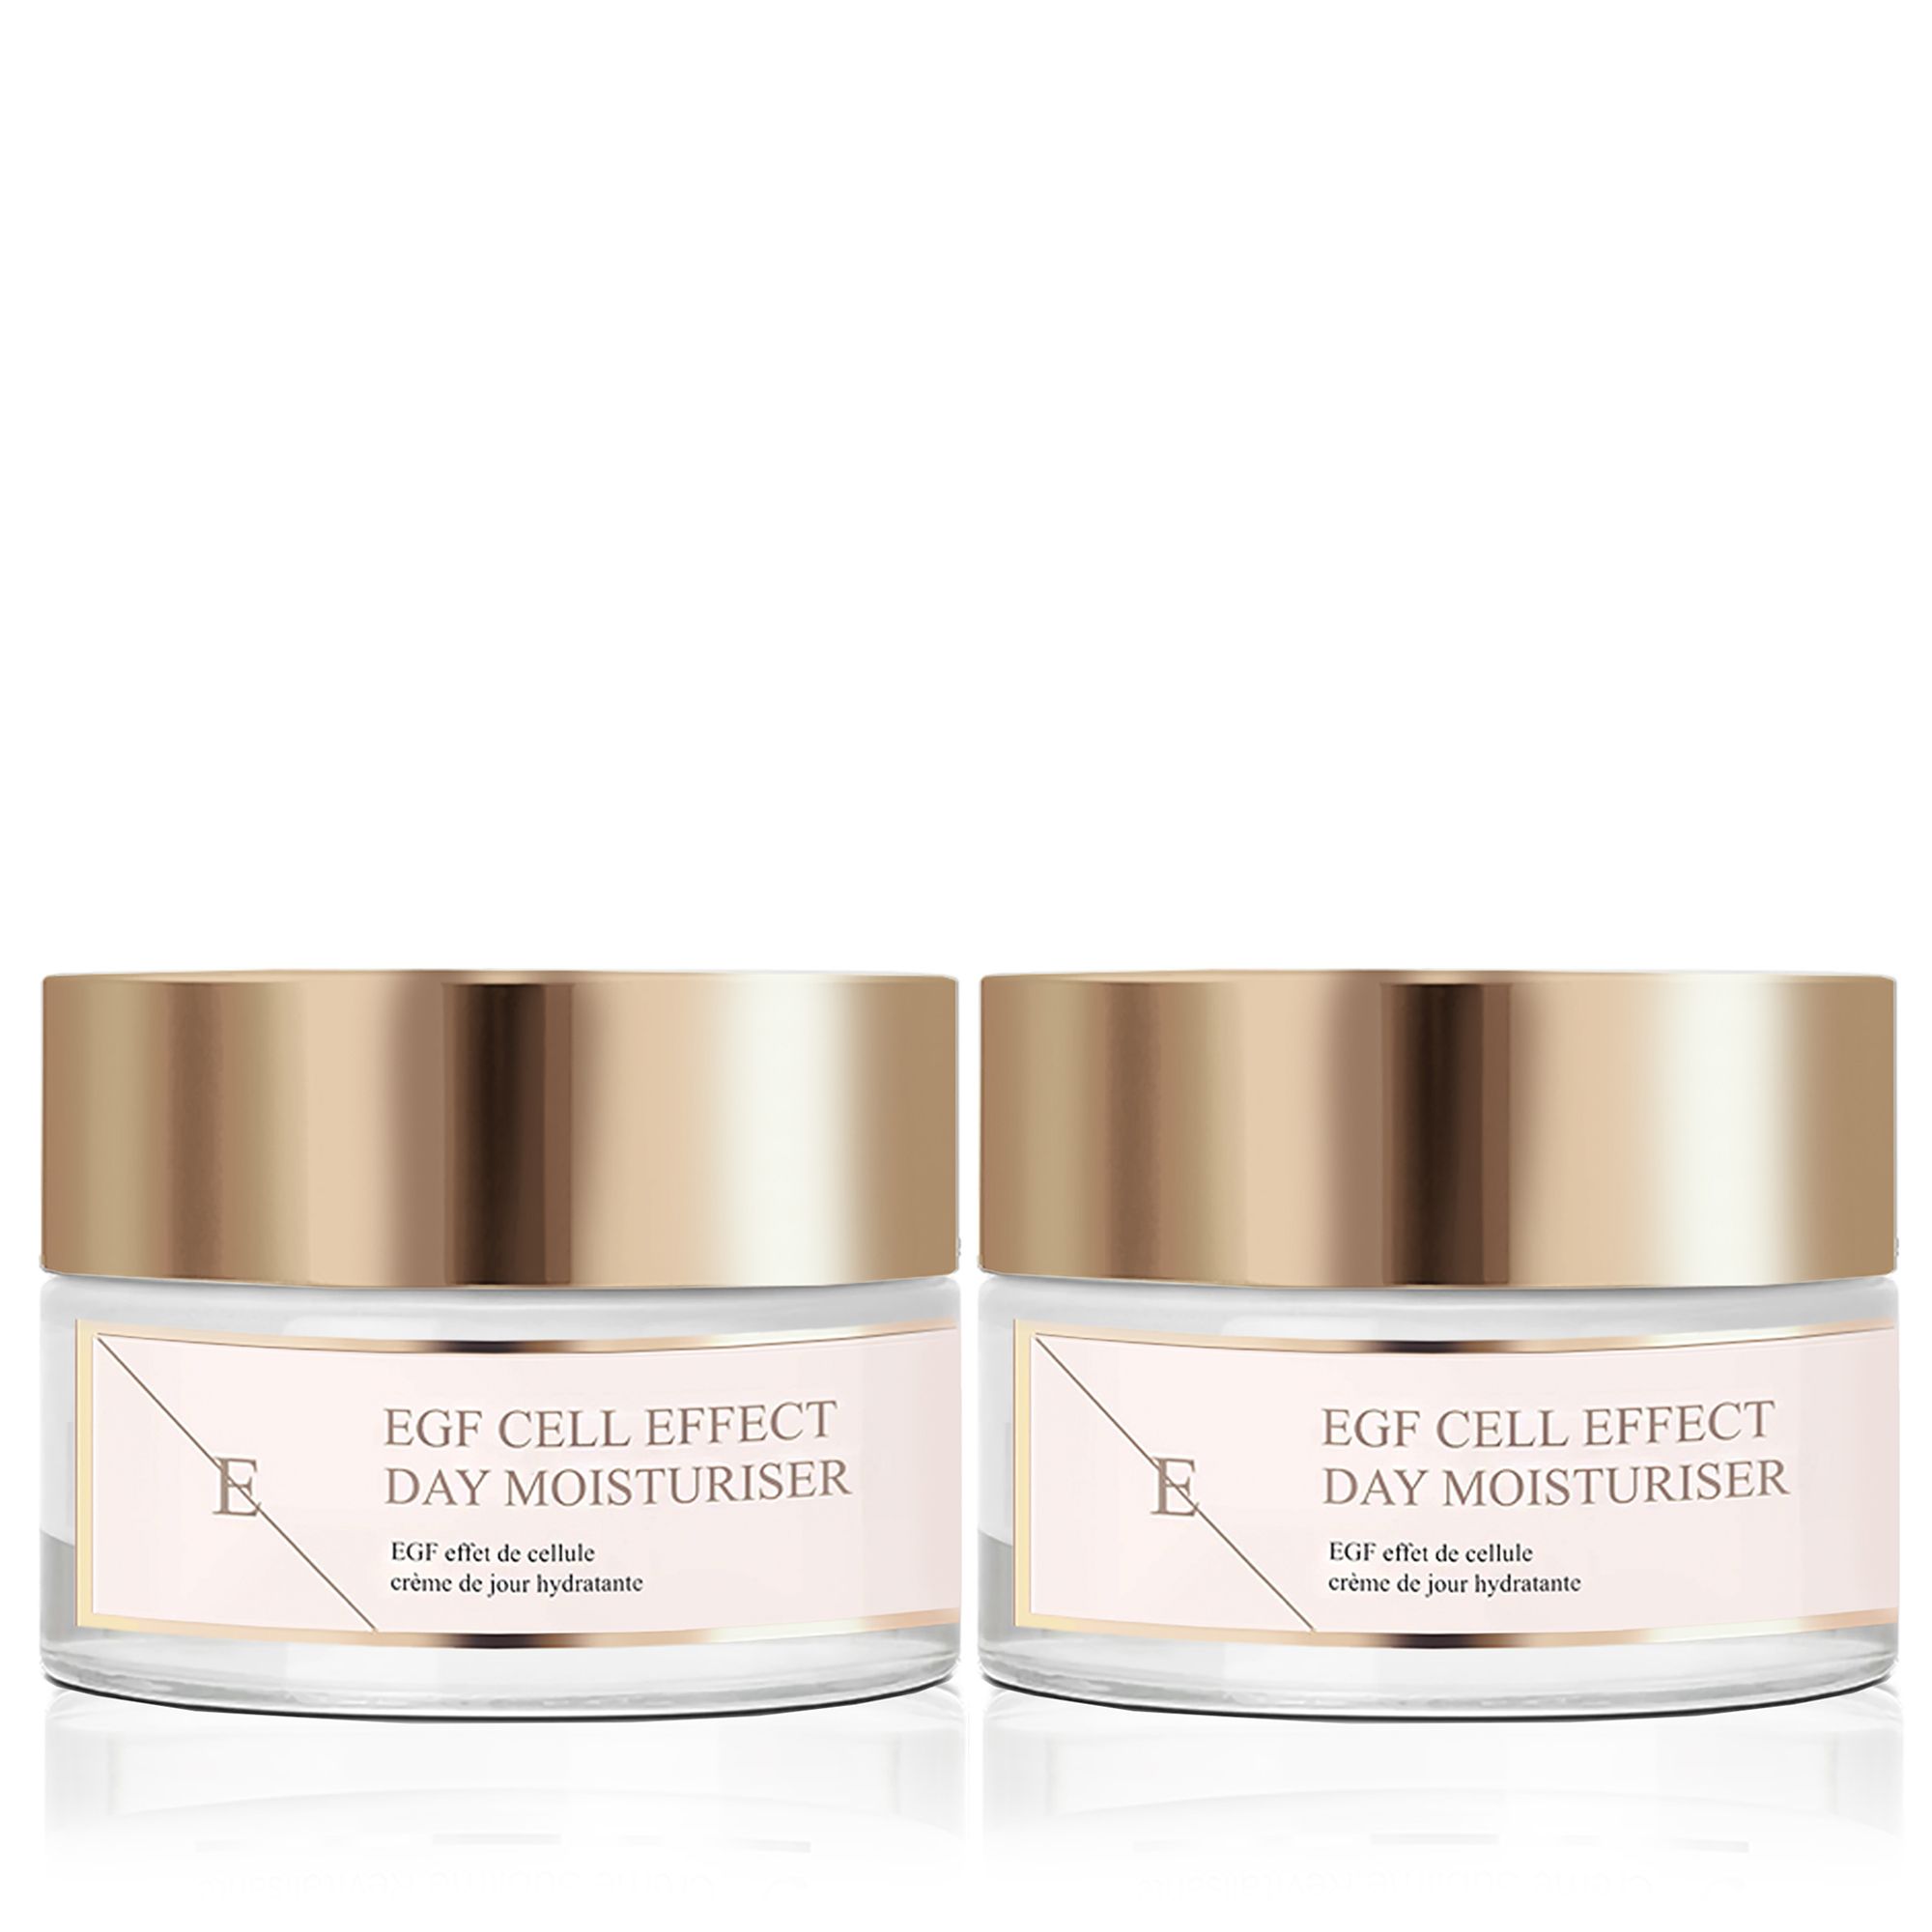 2 x EGF CELL EFFECT DAY MOISTURISER
EGF Cell Effect Day Moisturiser aims to deliver plumper, fully hydrated skin that appears more fresh and youthful. This day moisturiser contains a unique ingredient called SH-Oligopeptide-1 that has an identical chemical structure to an epidermal growth factor. Epidermal growth factor works to increase the rate of renewal of the skin smoothing the look of wrinkles and fine lines.Â 
Key Ingredients:
SH-OLIGOPEPTIDE-1
SH-Oligopeptide-1 that has an identical chemical structure to an epidermal growth factor. Epidermal growth factor works to increase the rate of renewal of the skin smoothing the look of wrinkles and fine lines.
SODIUM HYALURONATE
Hyaluronic Acid is naturally found in our skin, as we age our body's natural production of hyaluronic acid slows down. Hyaluronic acid is a key element making the skin looking plump and youthful as it holds moisture 1000 times its own weight. Our hyaluronic acid is called Sodium Hyaluronate and it is a smaller size of hyaluronic acid that is able to penetrate and hydrate more deeper levels of the skin than normal hyaluronic acid.
OCTOCRYLENE, ETHYLHEXYL METHOXYCINNAMATE
Are well-known ingredients used in sunscreens and they aim to help to protect the skin from UVB and short-wave UVA rays.
SHEA BUTTER
Shea butter is known for its moisturising and skin softening benefits. It is also high in vitamin E, A and F that protect the skin from free radical stress.
USAGE: Apply a large pea-sized amount of the cream on cleansed face, neckline, and neck in the morning.

Ingredients: Aqua (Water), Glycerin, Urea, Isoamyl Cocoate, Dimethicone, Octocrylene, Ethylhexyl Methoxycinnamate, Glyceryl Stearate, Squalane, Glyceryl Stearate Citrate, Cyclopentasiloxane, Butyrospermum Parkii (Shea) Butter, Cera Alba, Camellia Japonica Seed Oil, Ethylhexyl Salicylate, Cetearyl Alcohol, Butylene Glycol, Dimethicone/Vinyl Dimethicone Crosspolymer, SH-Oligopeptide-1, Hydrogenated Lecithin, Sodium Oleate, Glycine Soja (Soyabean) Oil, Sodium Hyaluronate, Hydroxypropyl Bispalmitamide MEA, Phenoxyethanol, Cyclohexasiloxane, Butyl Methoxydibenzoylmethane, Triethanolamine, Parfum (Fragrance), Acrylates/C10-30 Alkyl Acrylate Crosspolymer, Ethylhexylglycerin, Disodium EDTA, BHA, Benzyl Salicylate, Butylphenyl Methylpropional, Geraniol, Hexyl Cinnamal, Linalool.